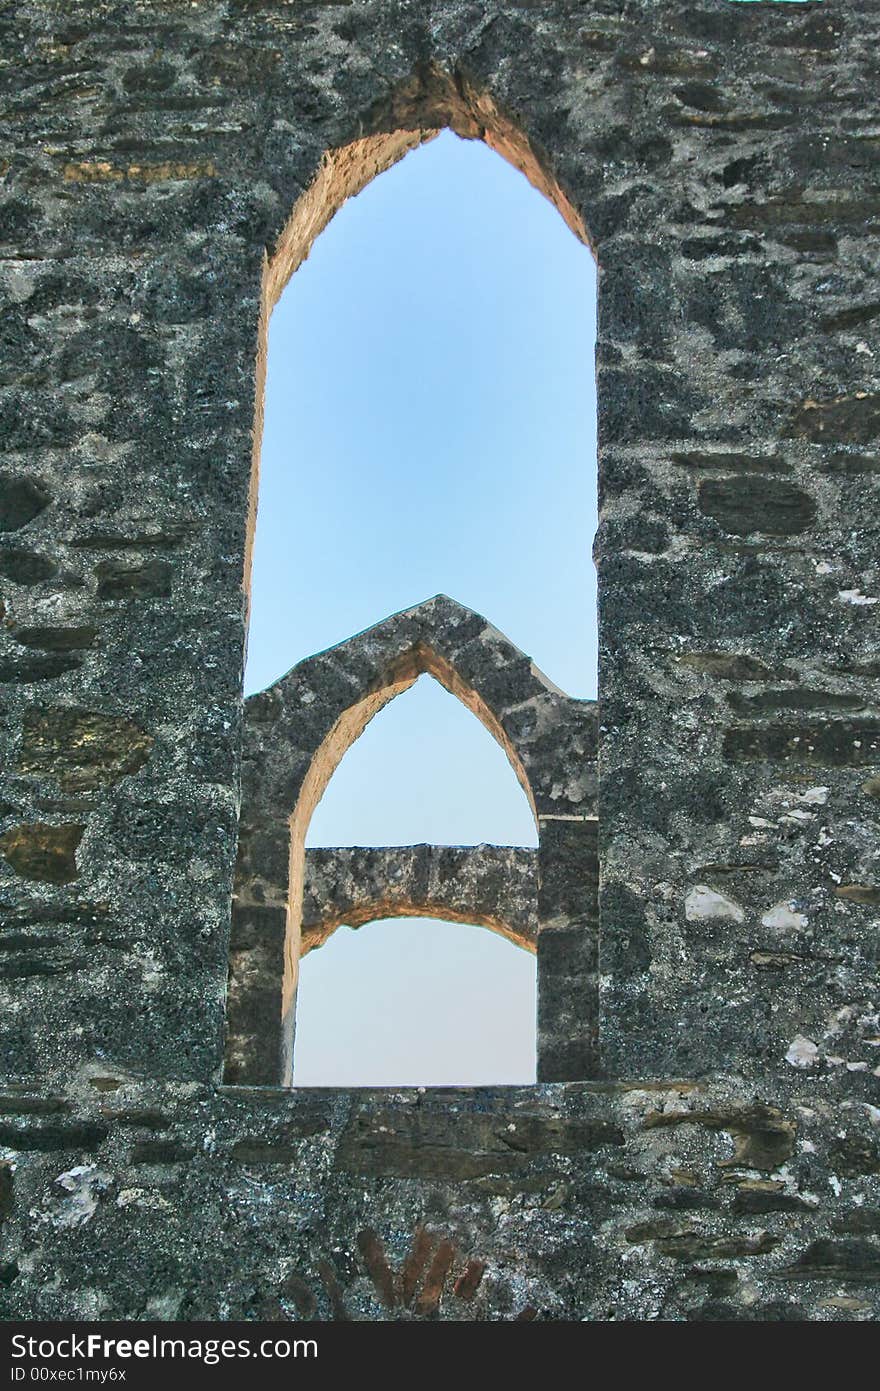 An old historic arched window with blue sky background